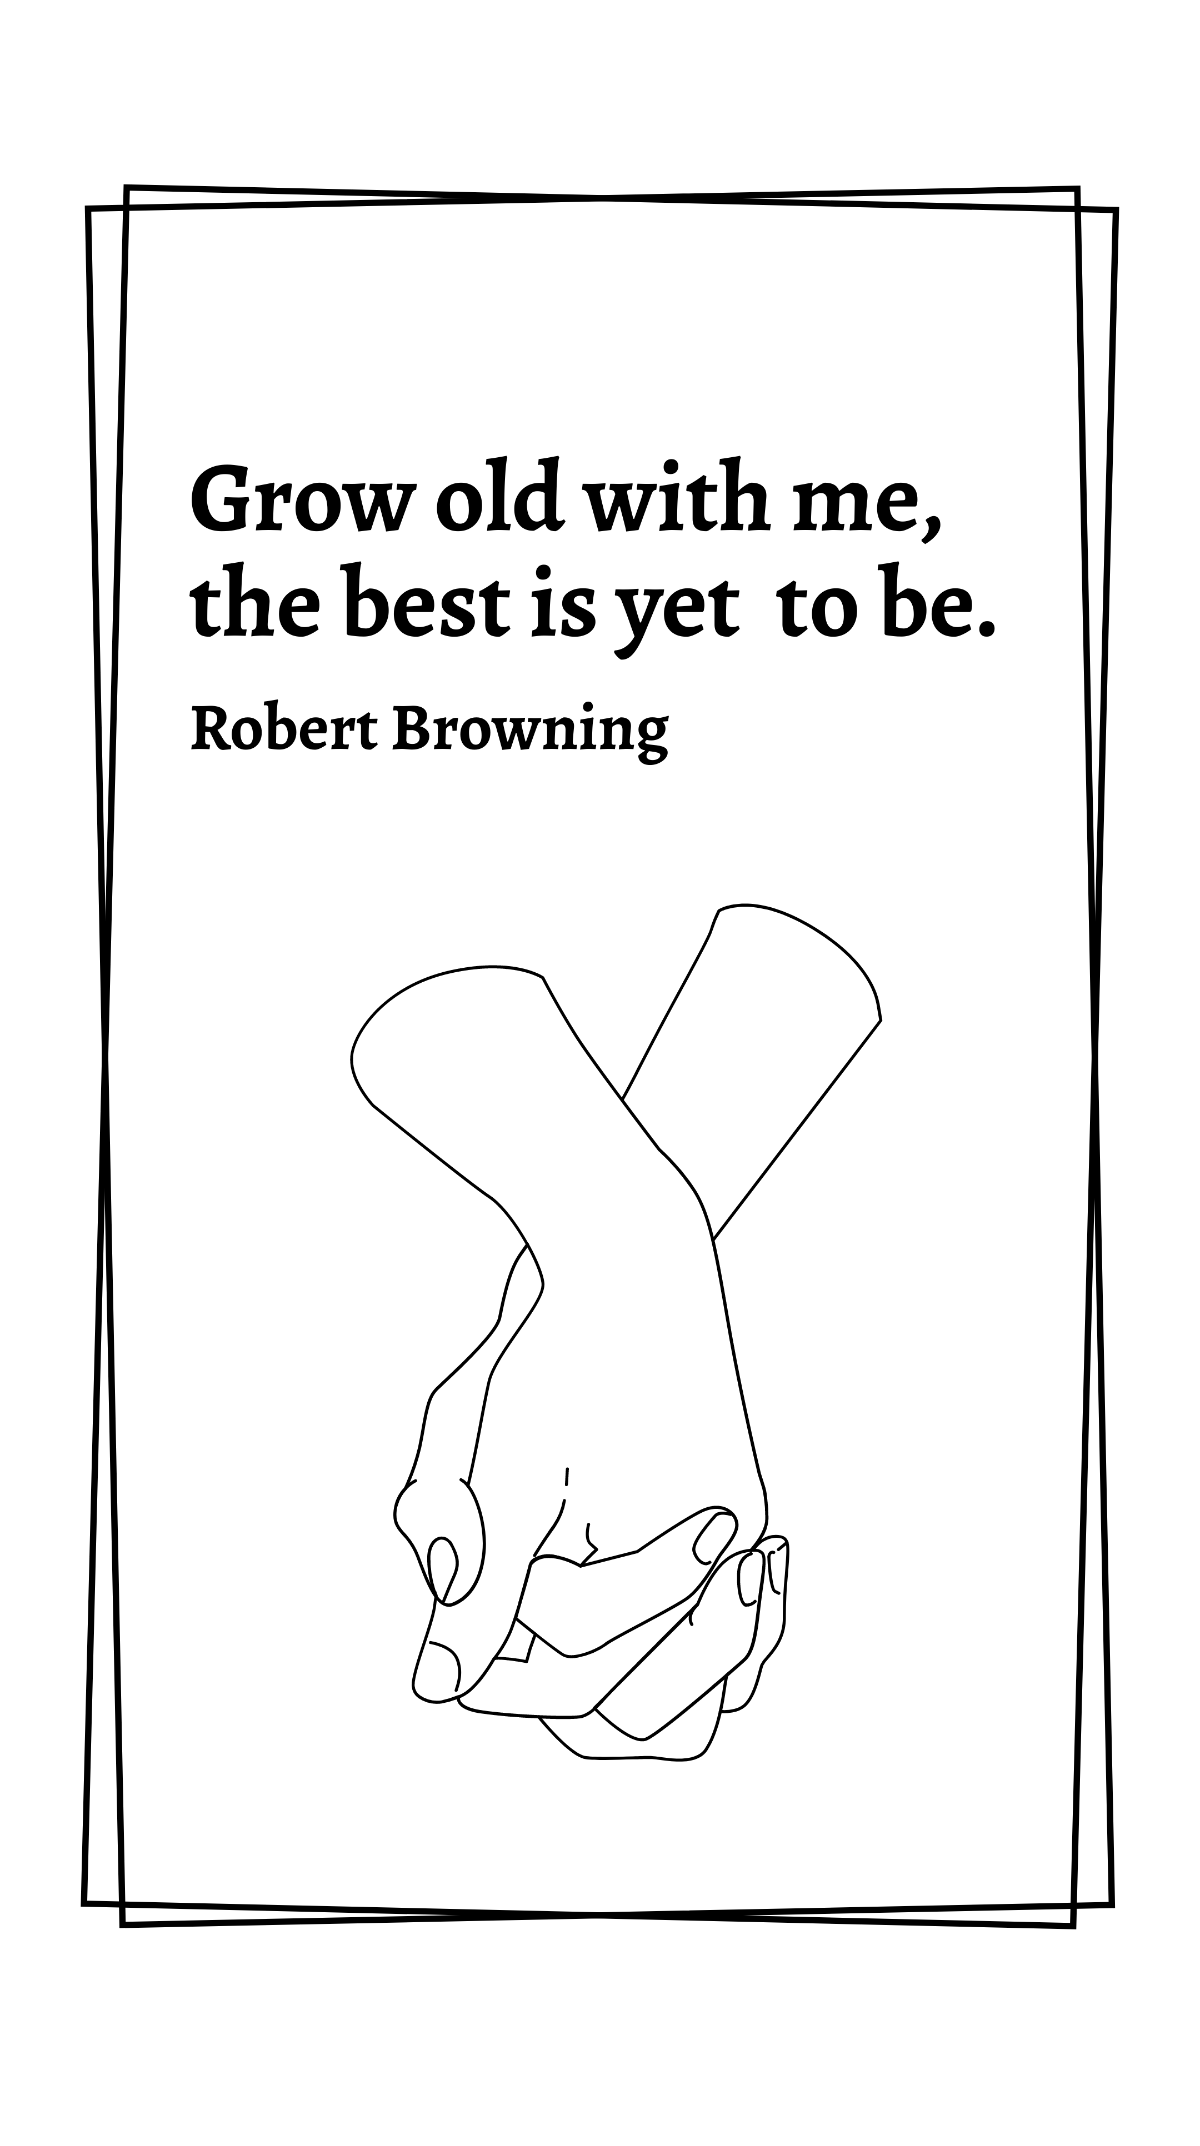 Robert Browning - Grow old with me, the best is yet to be. Template